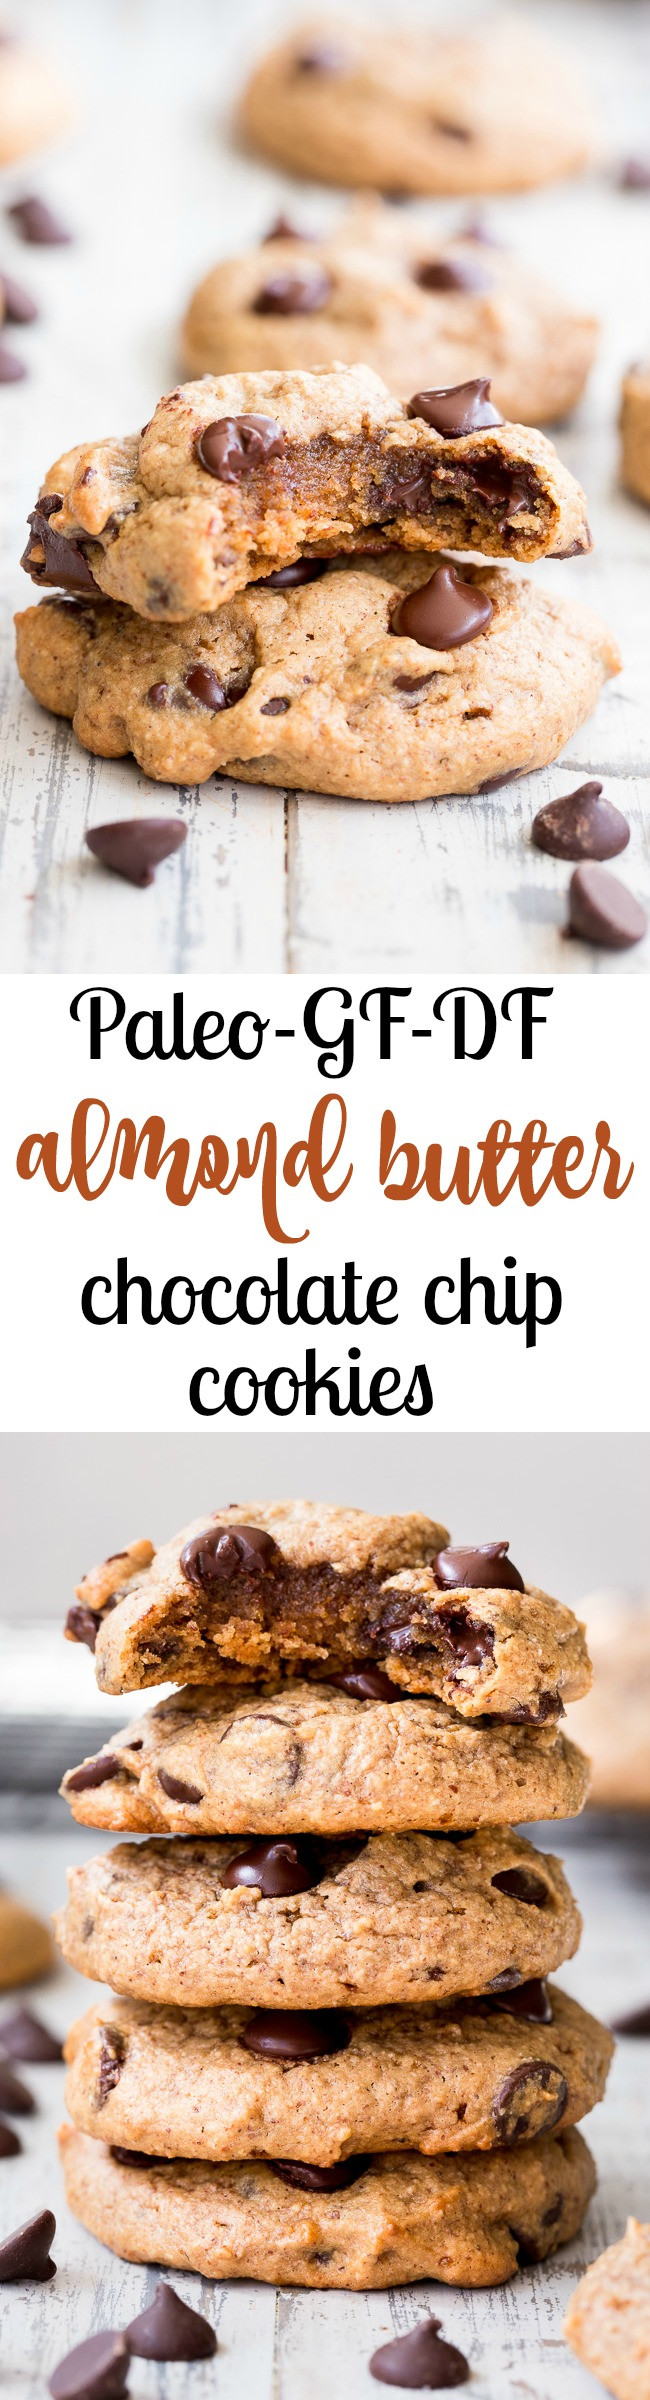 Paleo Almond Butter Cookies
 Chewy Chocolate Chip Cookies with Almond Butter Paleo GF